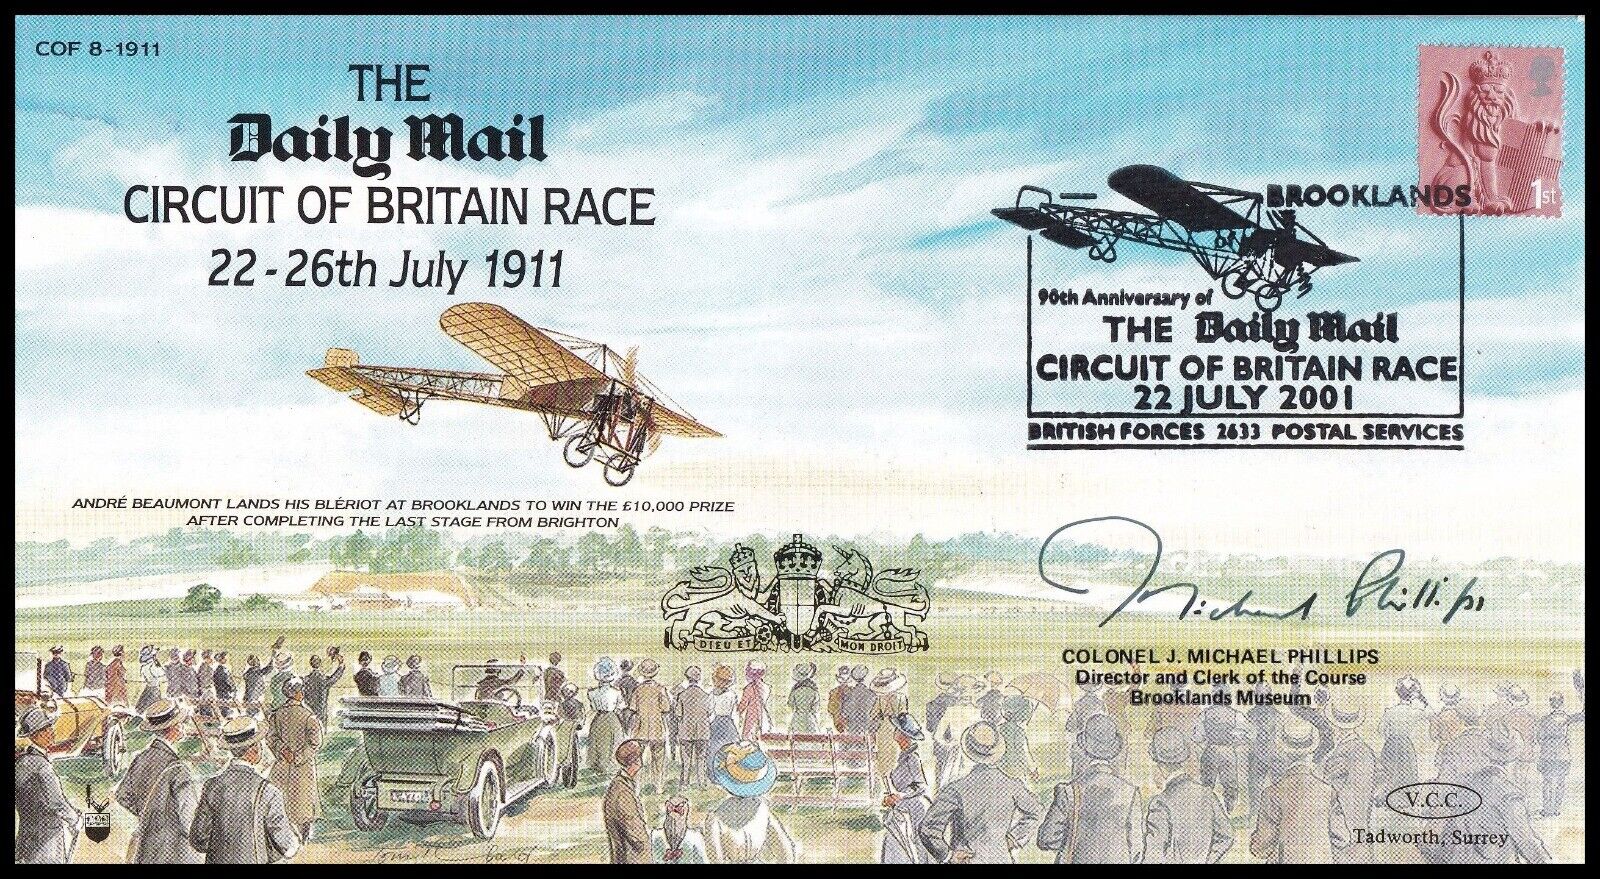 Col J. MICHAEL PHILLIPS Signed COF8 The Daily Mail Circuit of Britain Race Cover